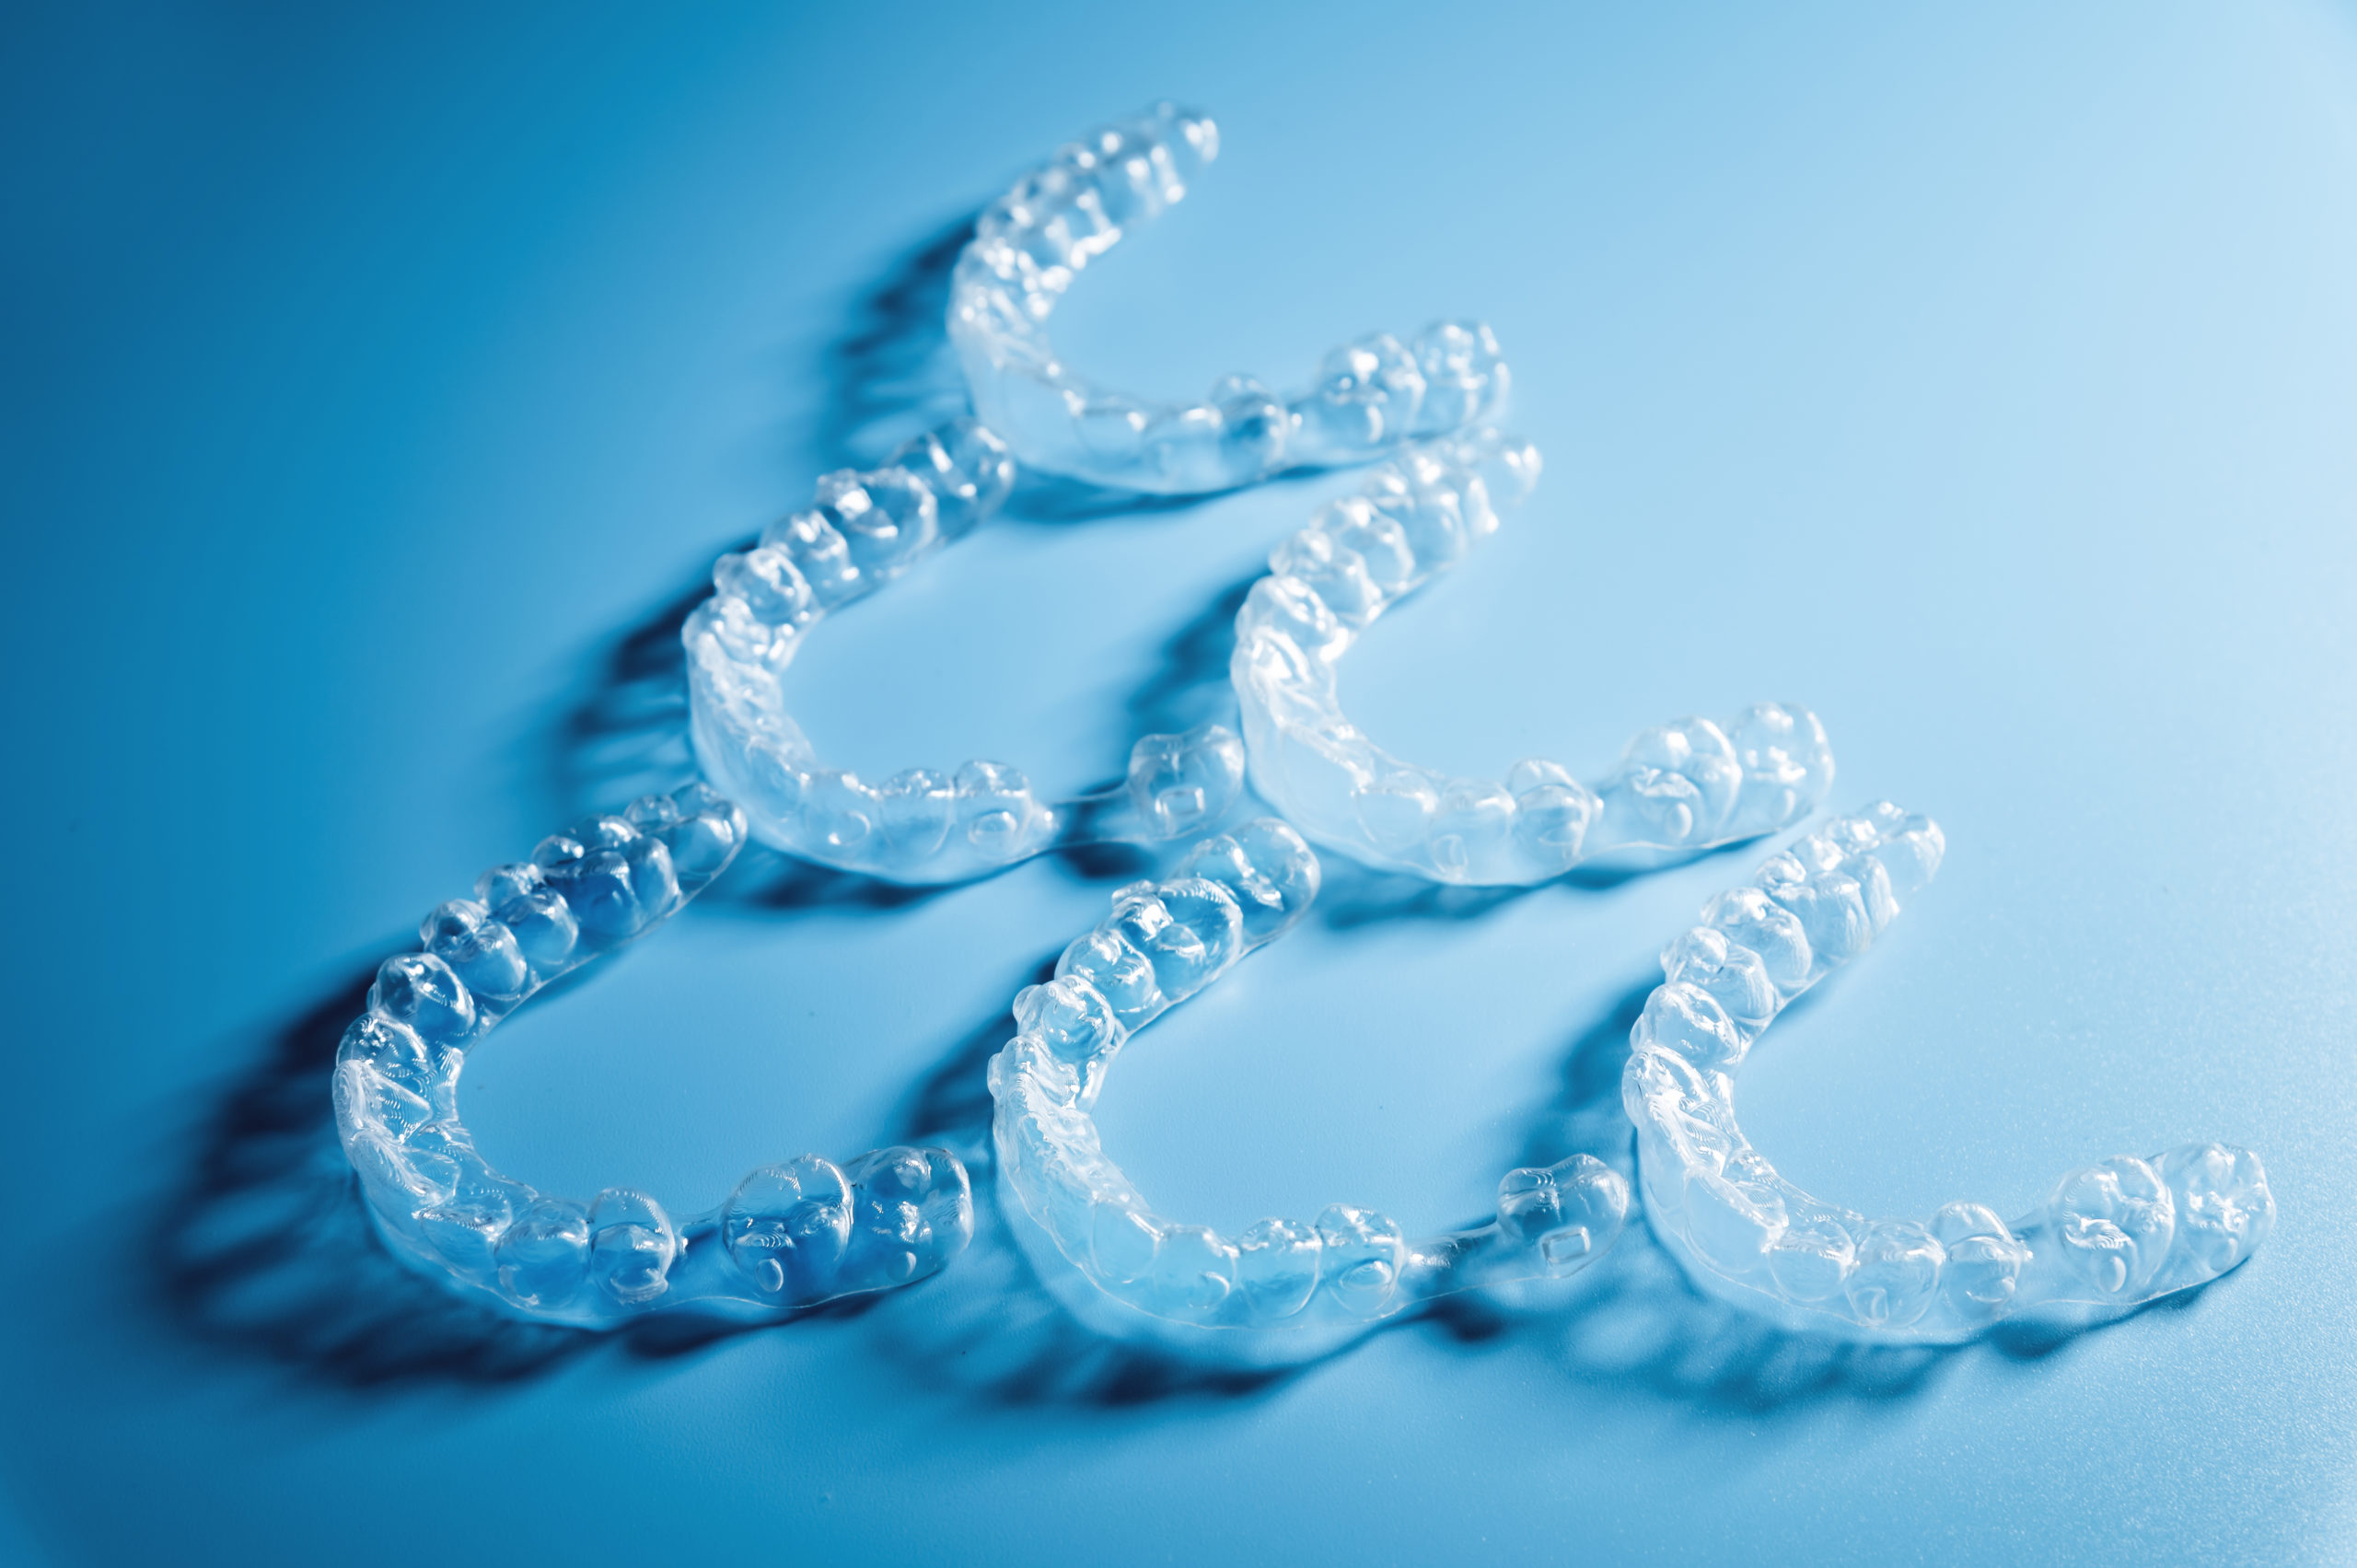 Invisalign lined up in a pyramid shape on a blue background